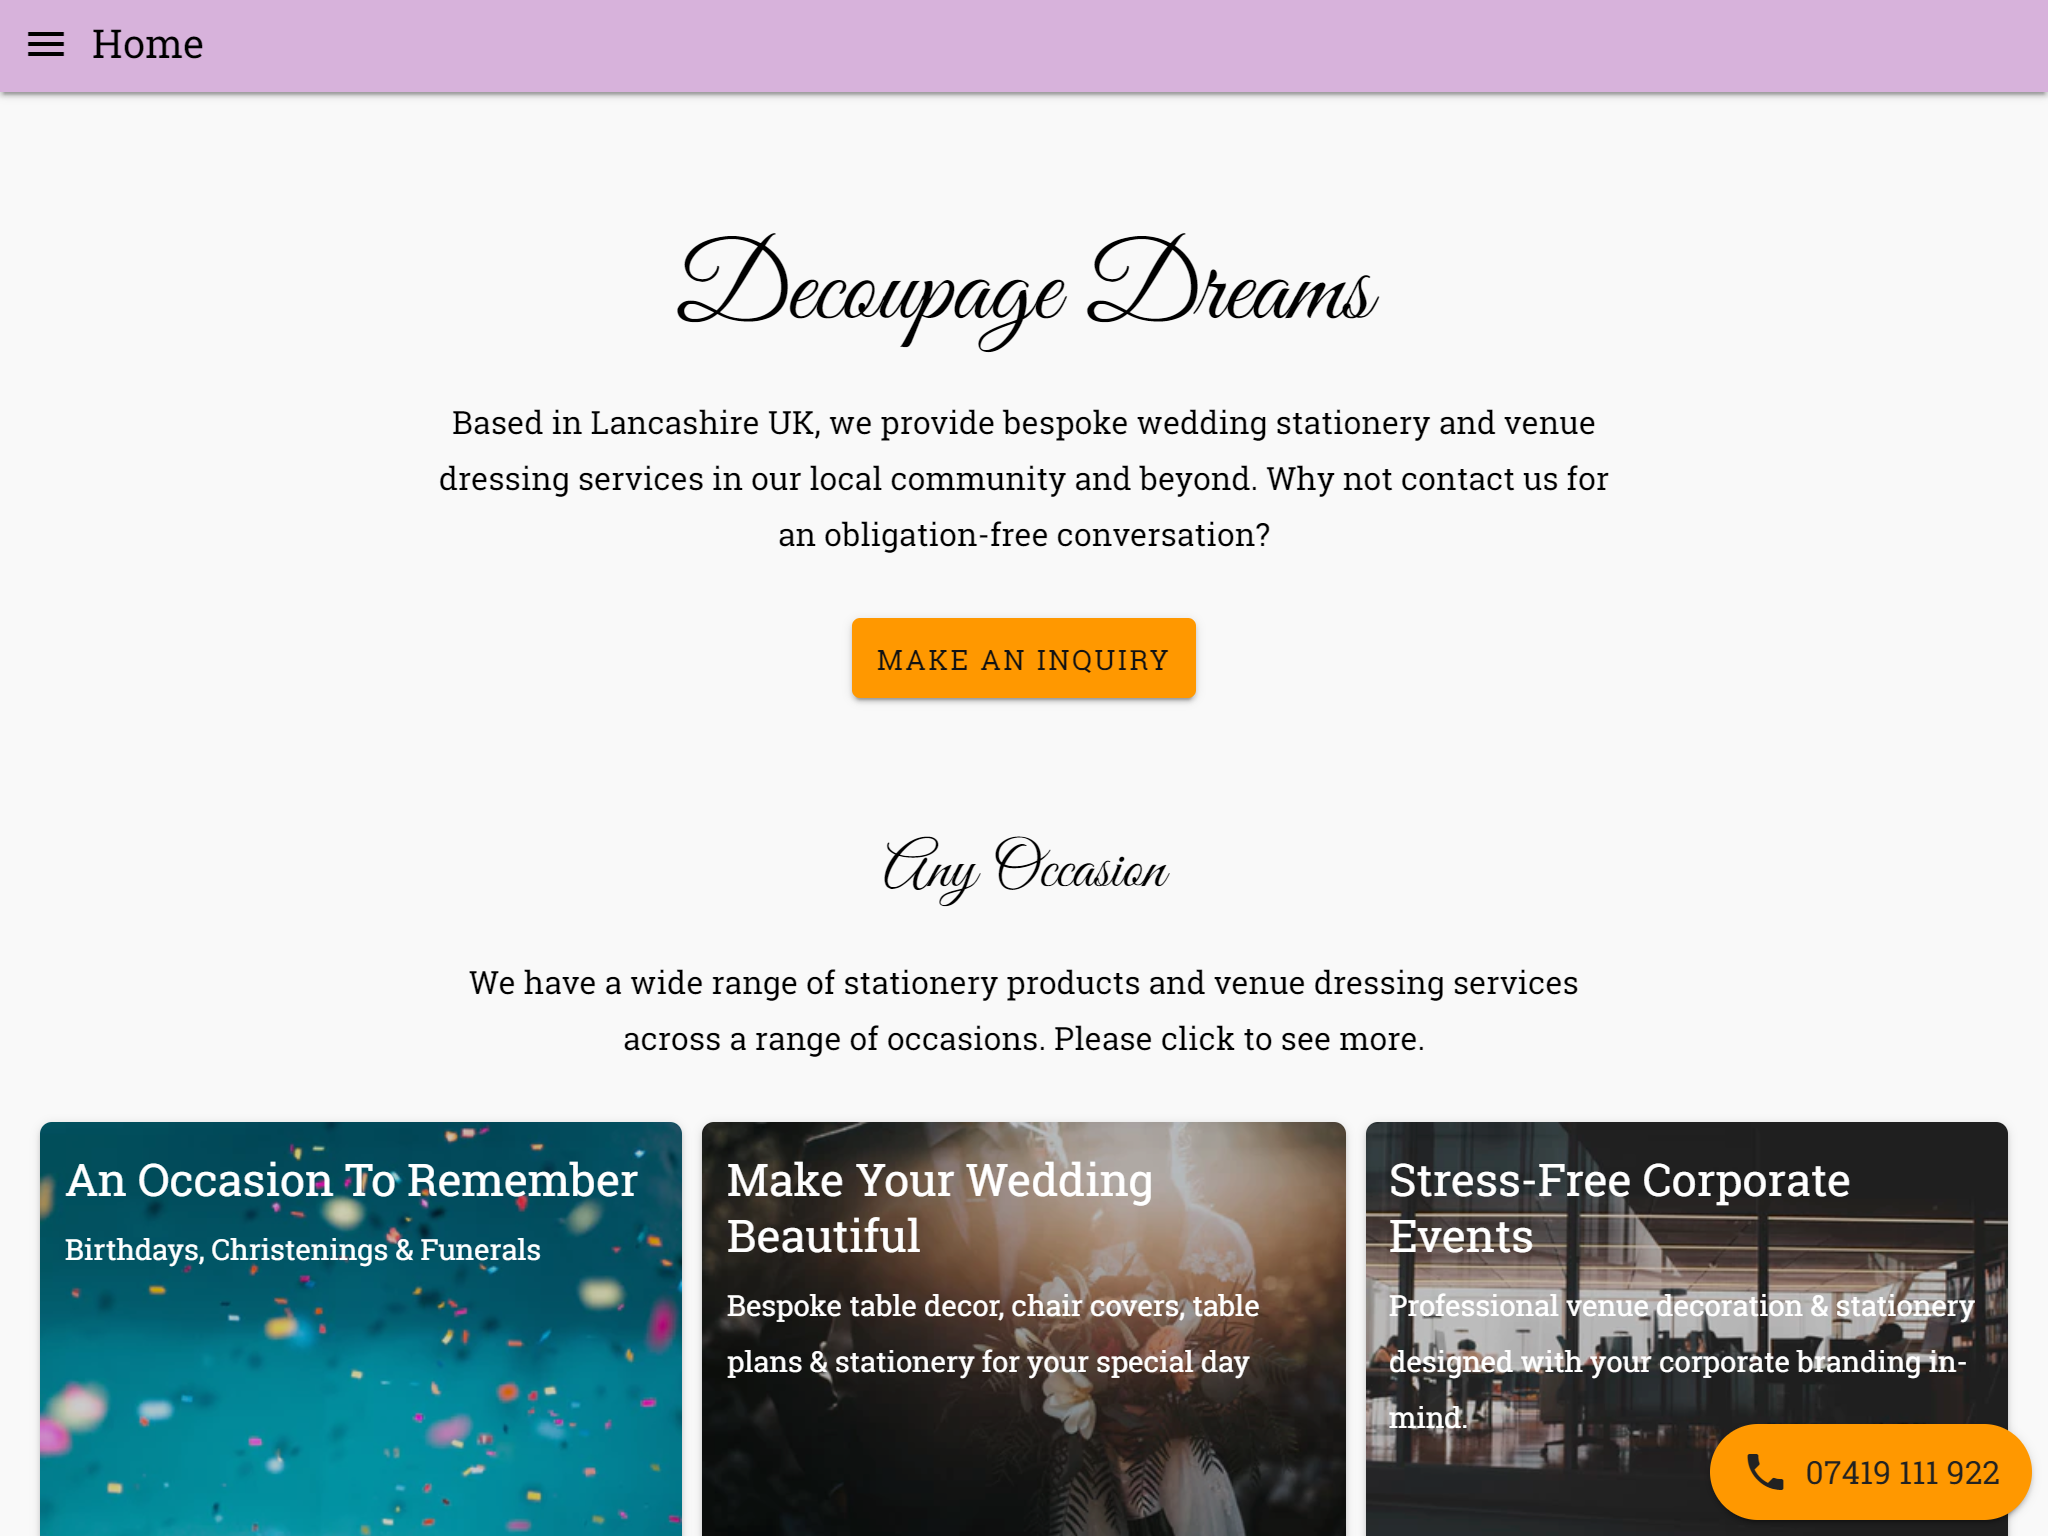 Screenshot of Decoupage Dreams's new home page I built.